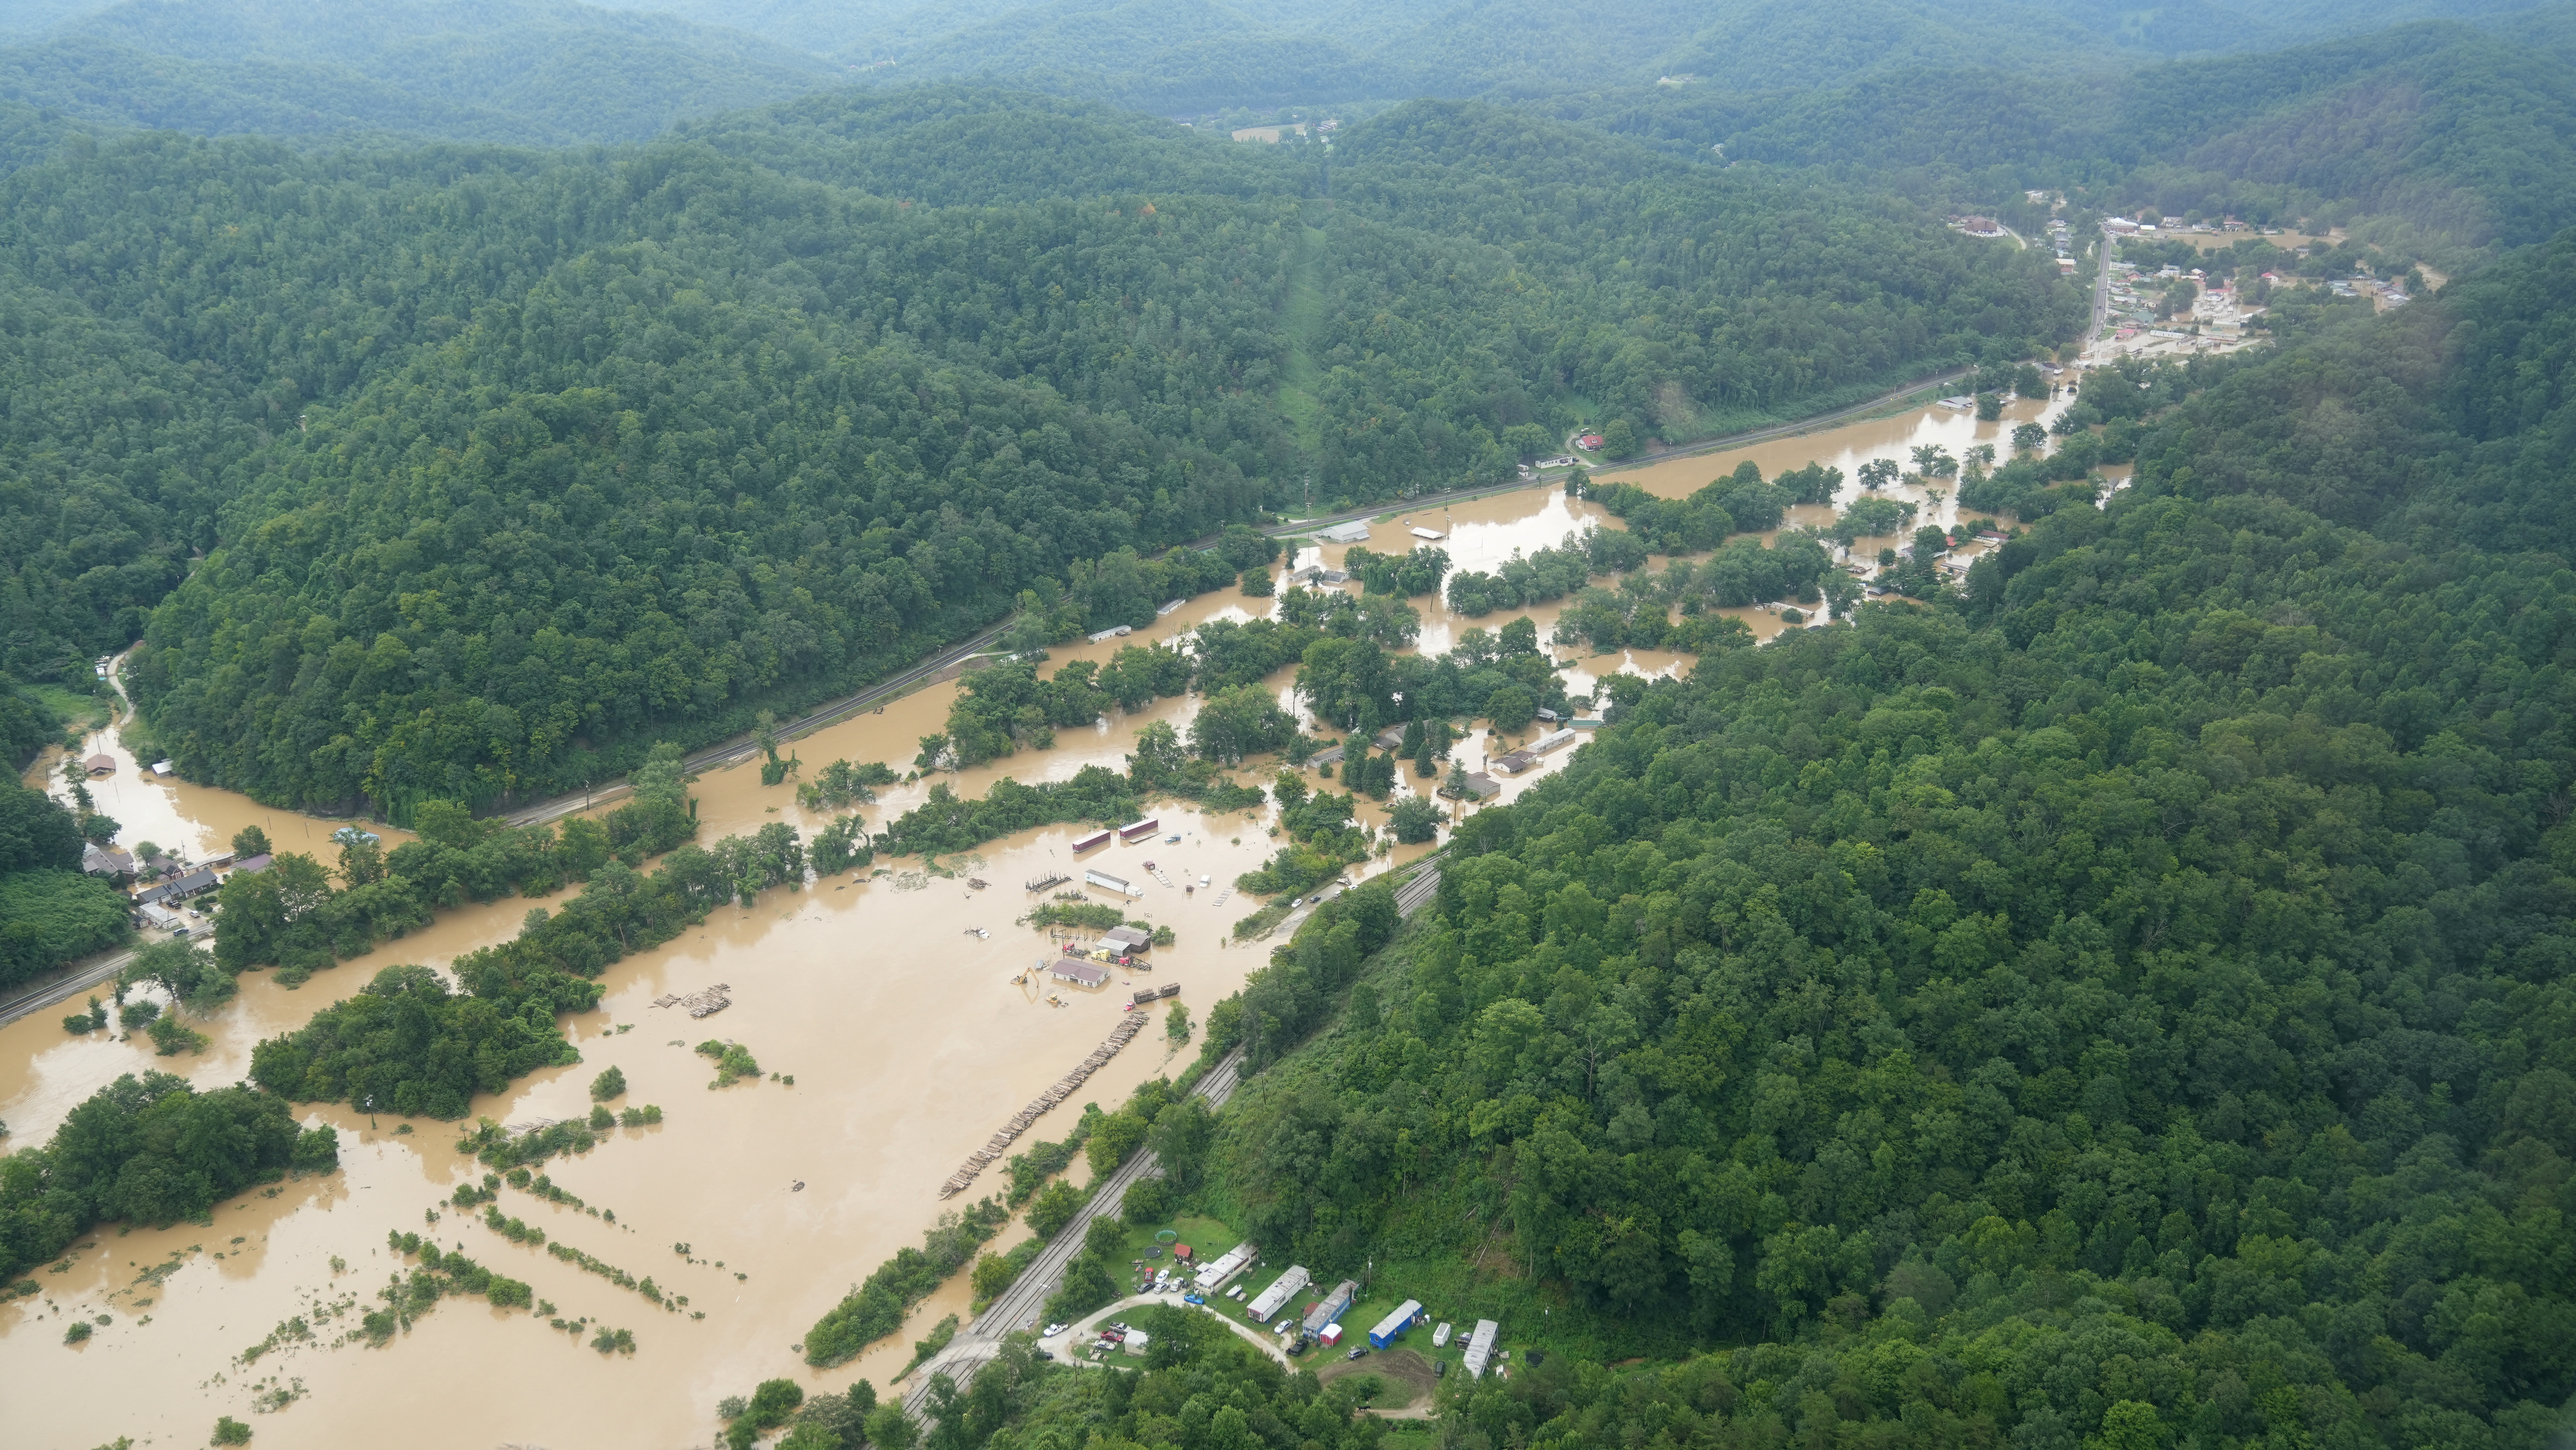 A valley lies flooded as seen from a helicopter during a tour by Kentucky Governor Andy Beshear